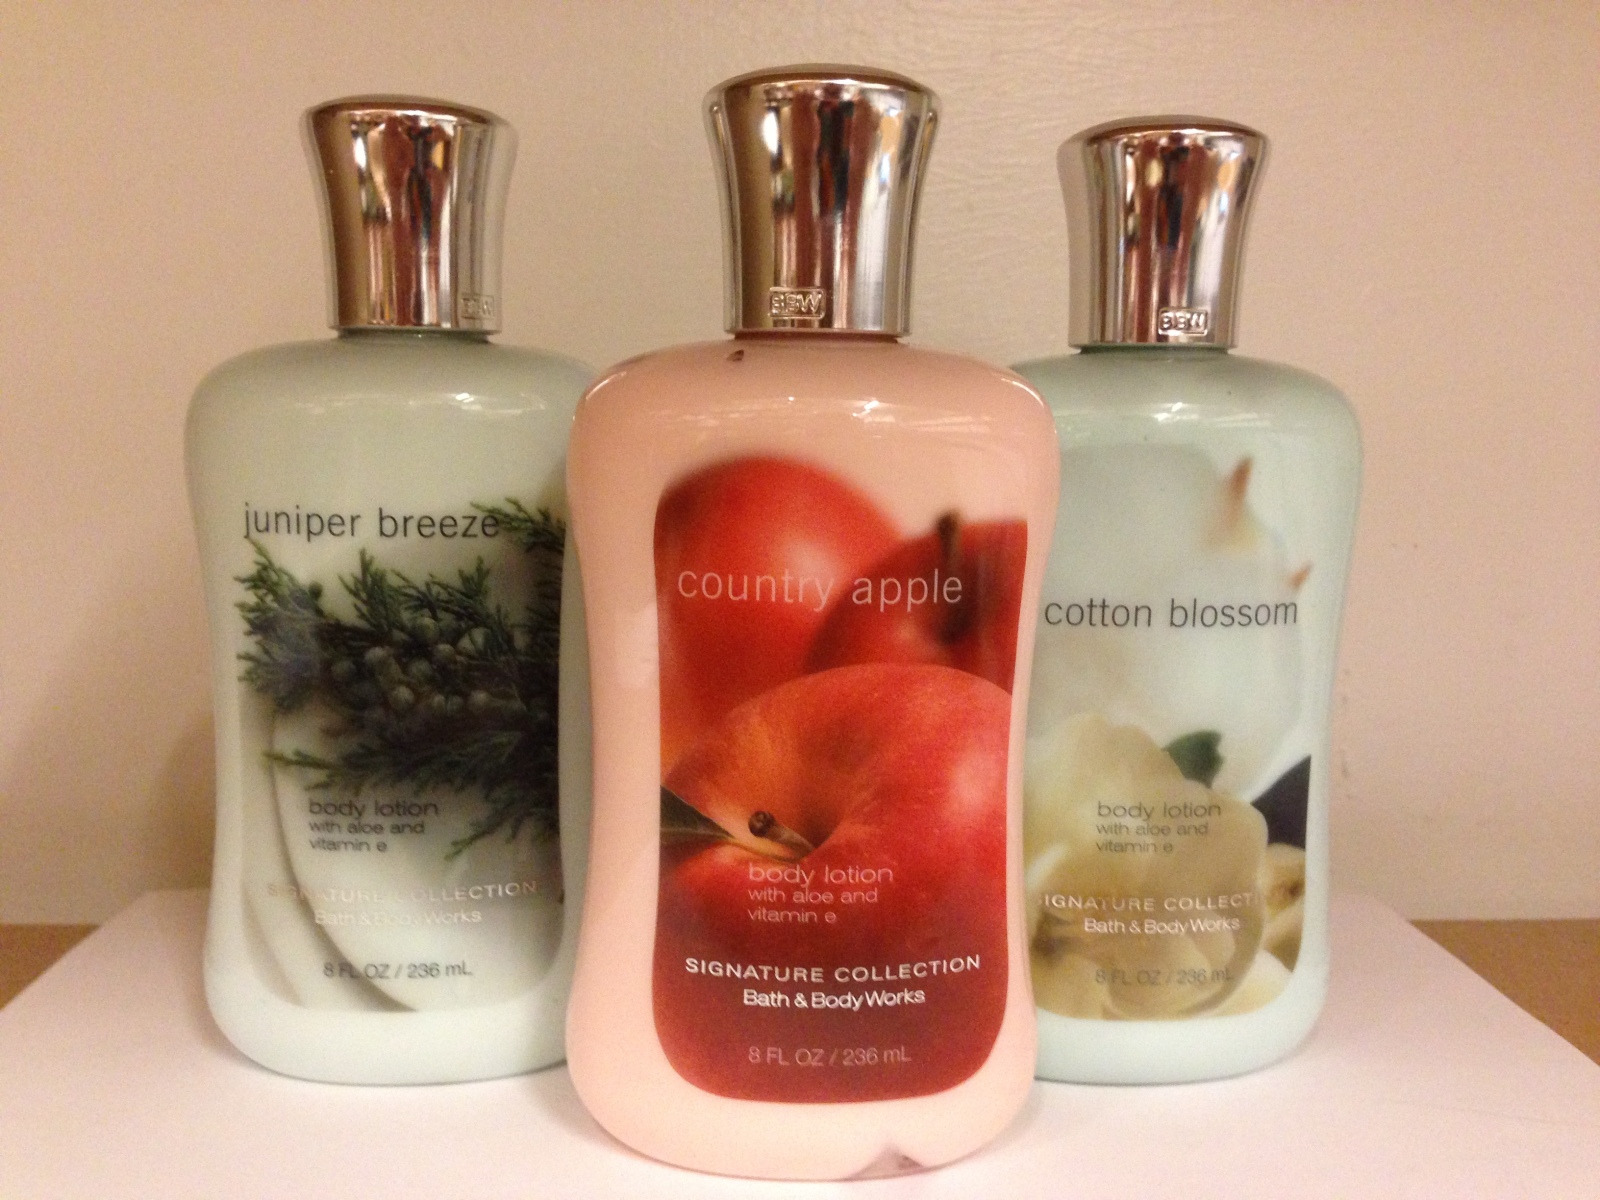 Sandalwood Suede Scentportable Fragrance Refill - Bath And Body Works